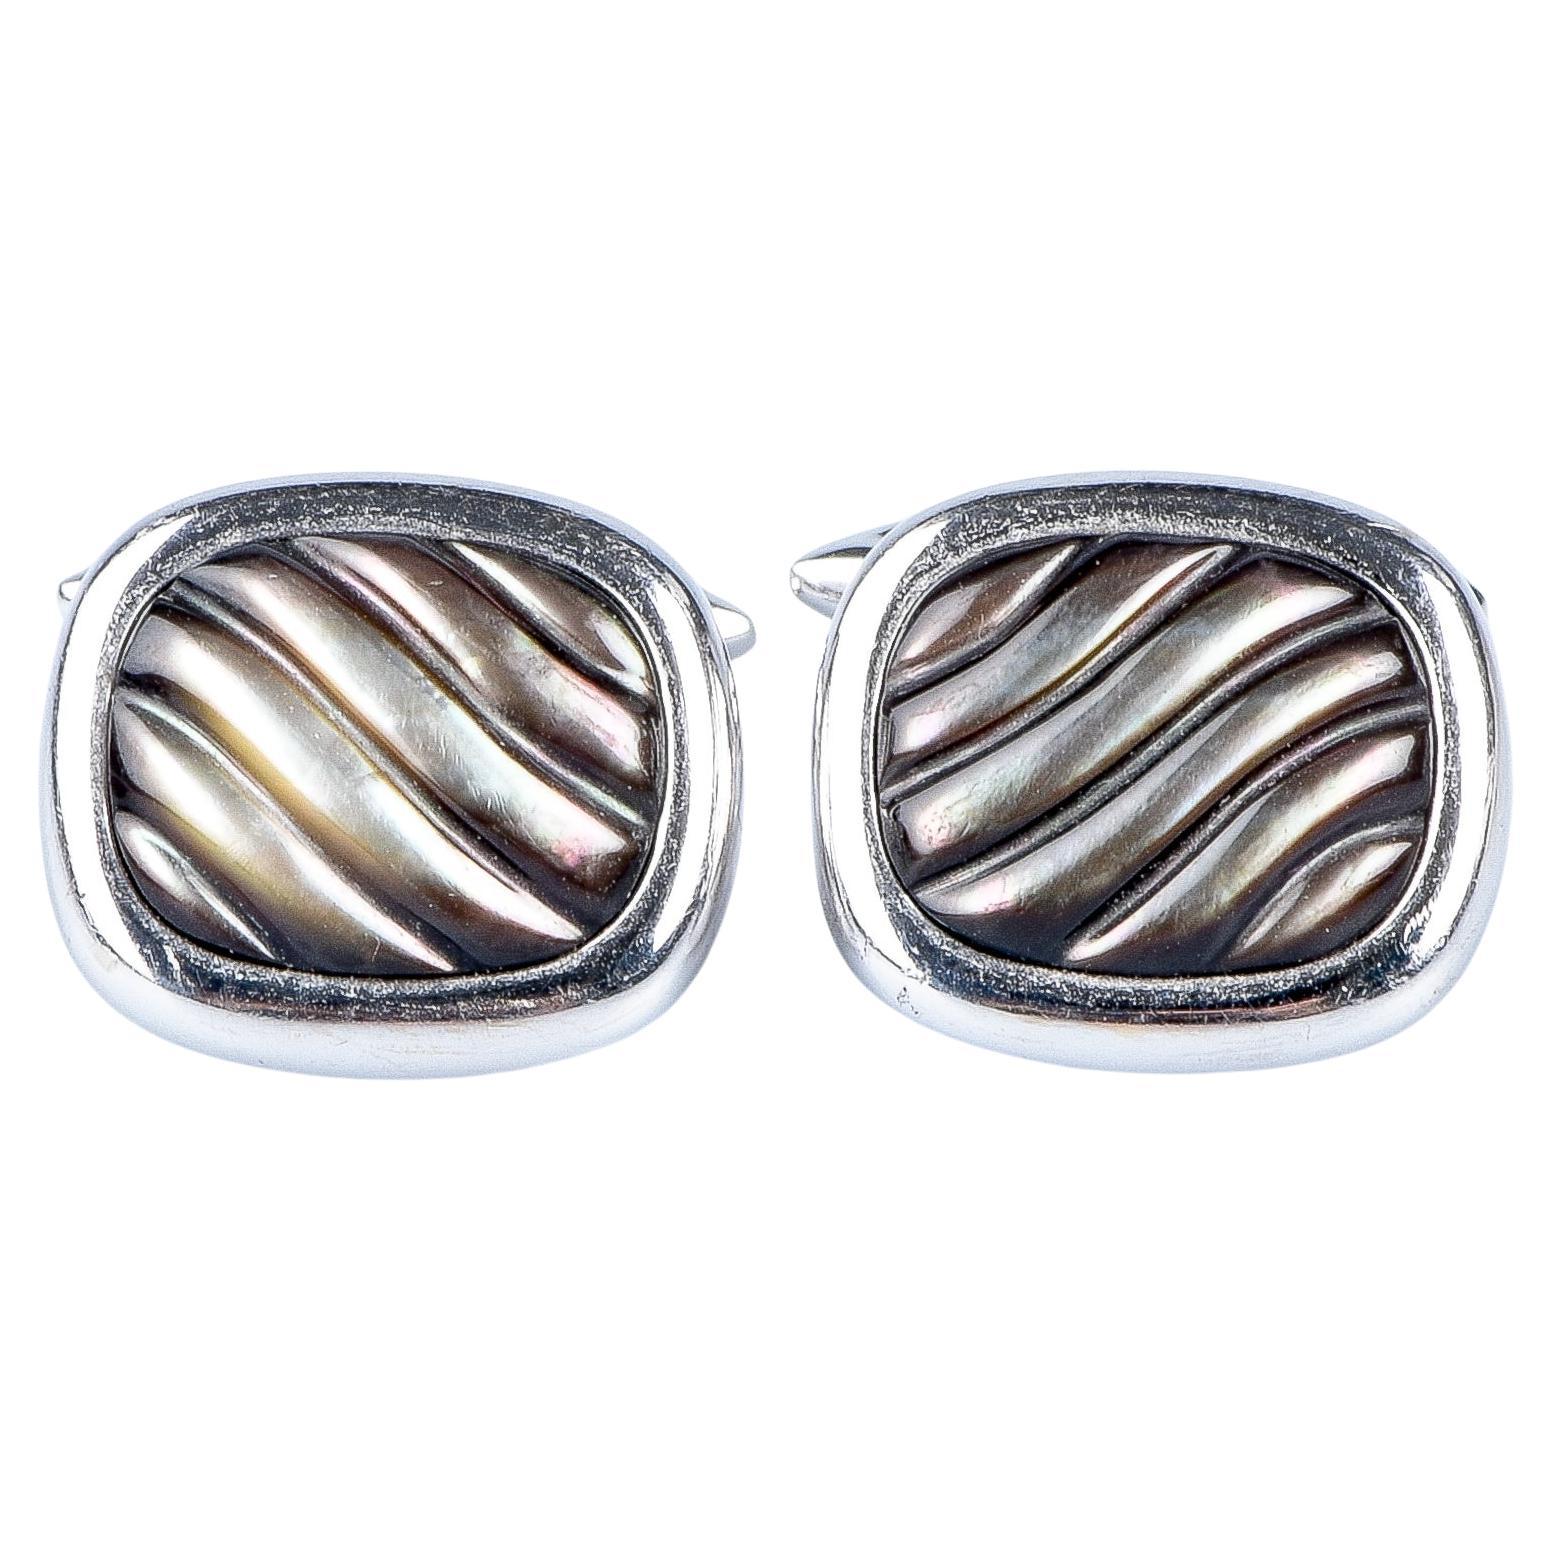 Beautiful Haute Joaillerie 18 carat white gold mother of pearls cufflinks